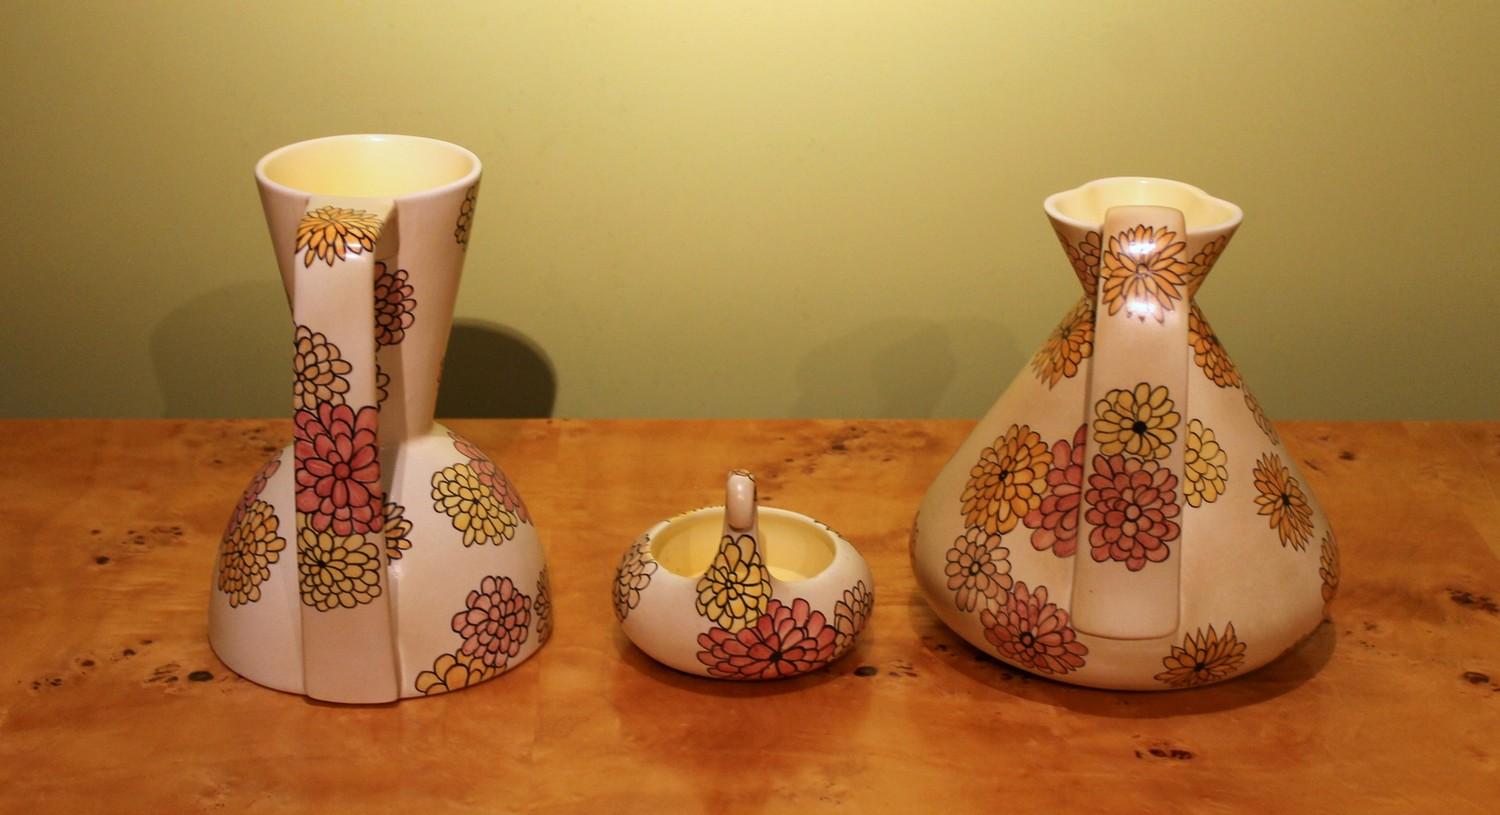 20th Century Lenci Italian Art Deco Ceramic Jug, Pitcher and Tray Set with Floral Patterns For Sale